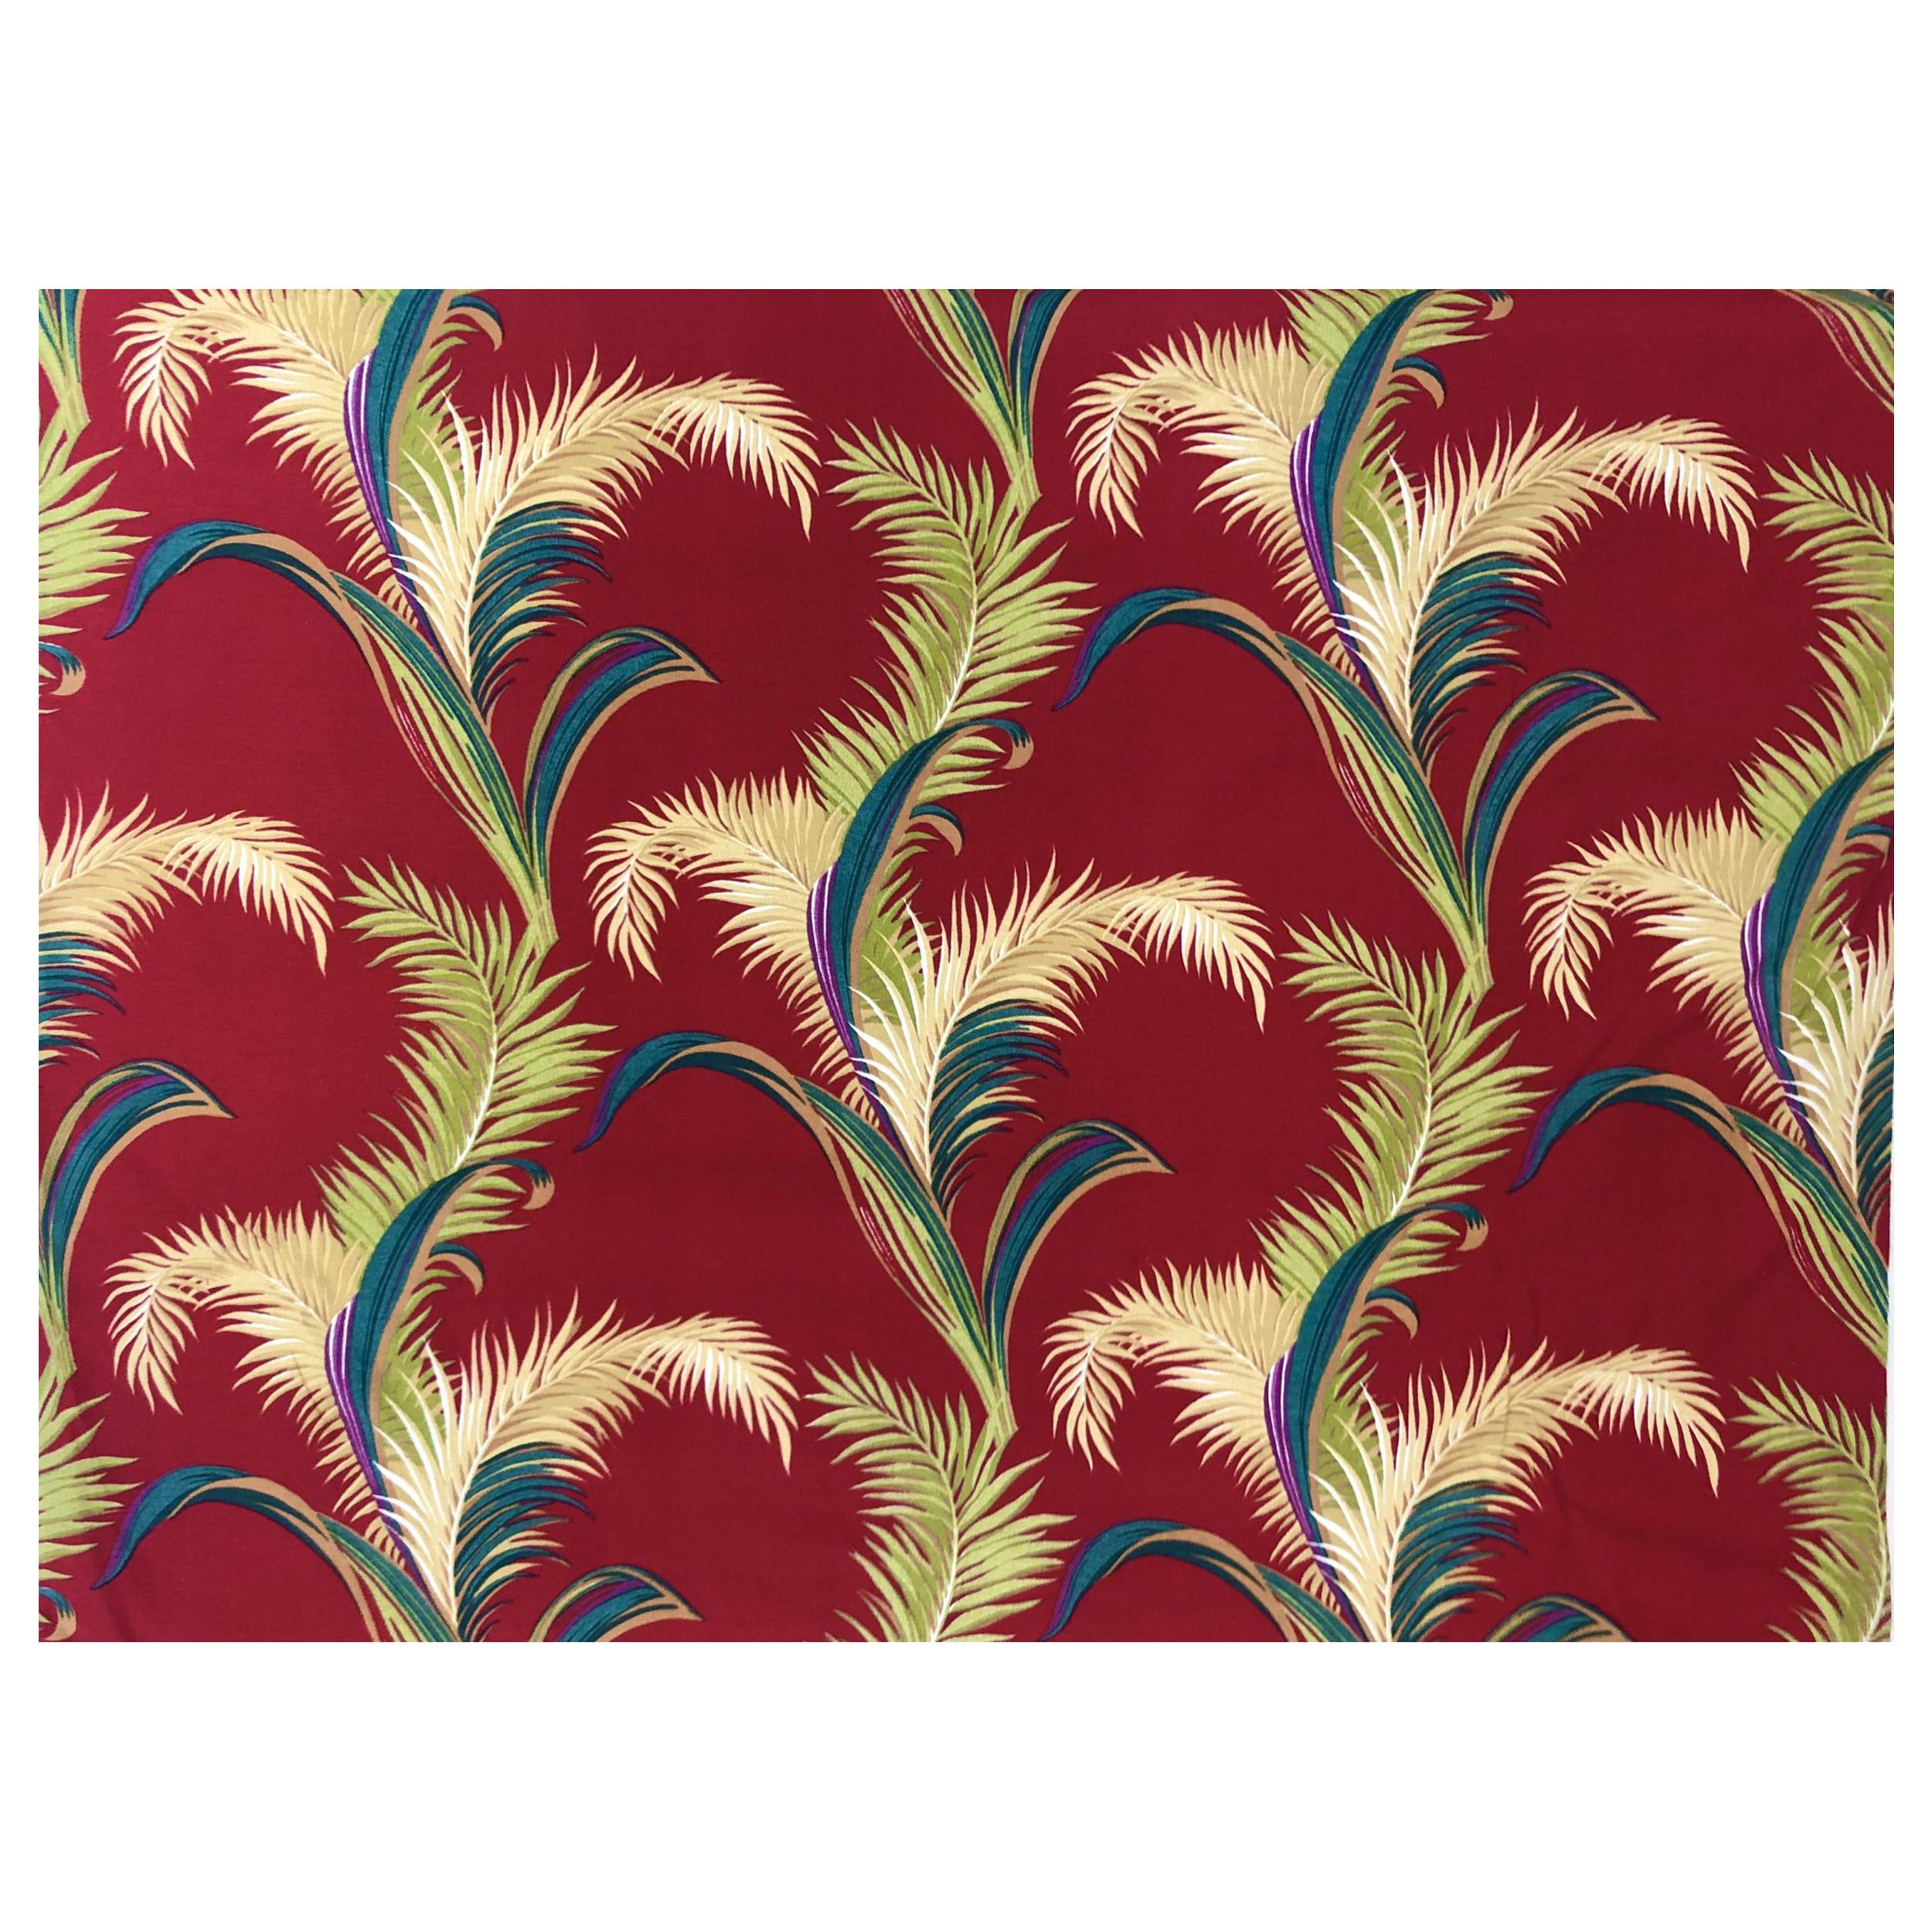 Vintage Mid Century Red Barkcloth with Tropical Palm Leaf Design